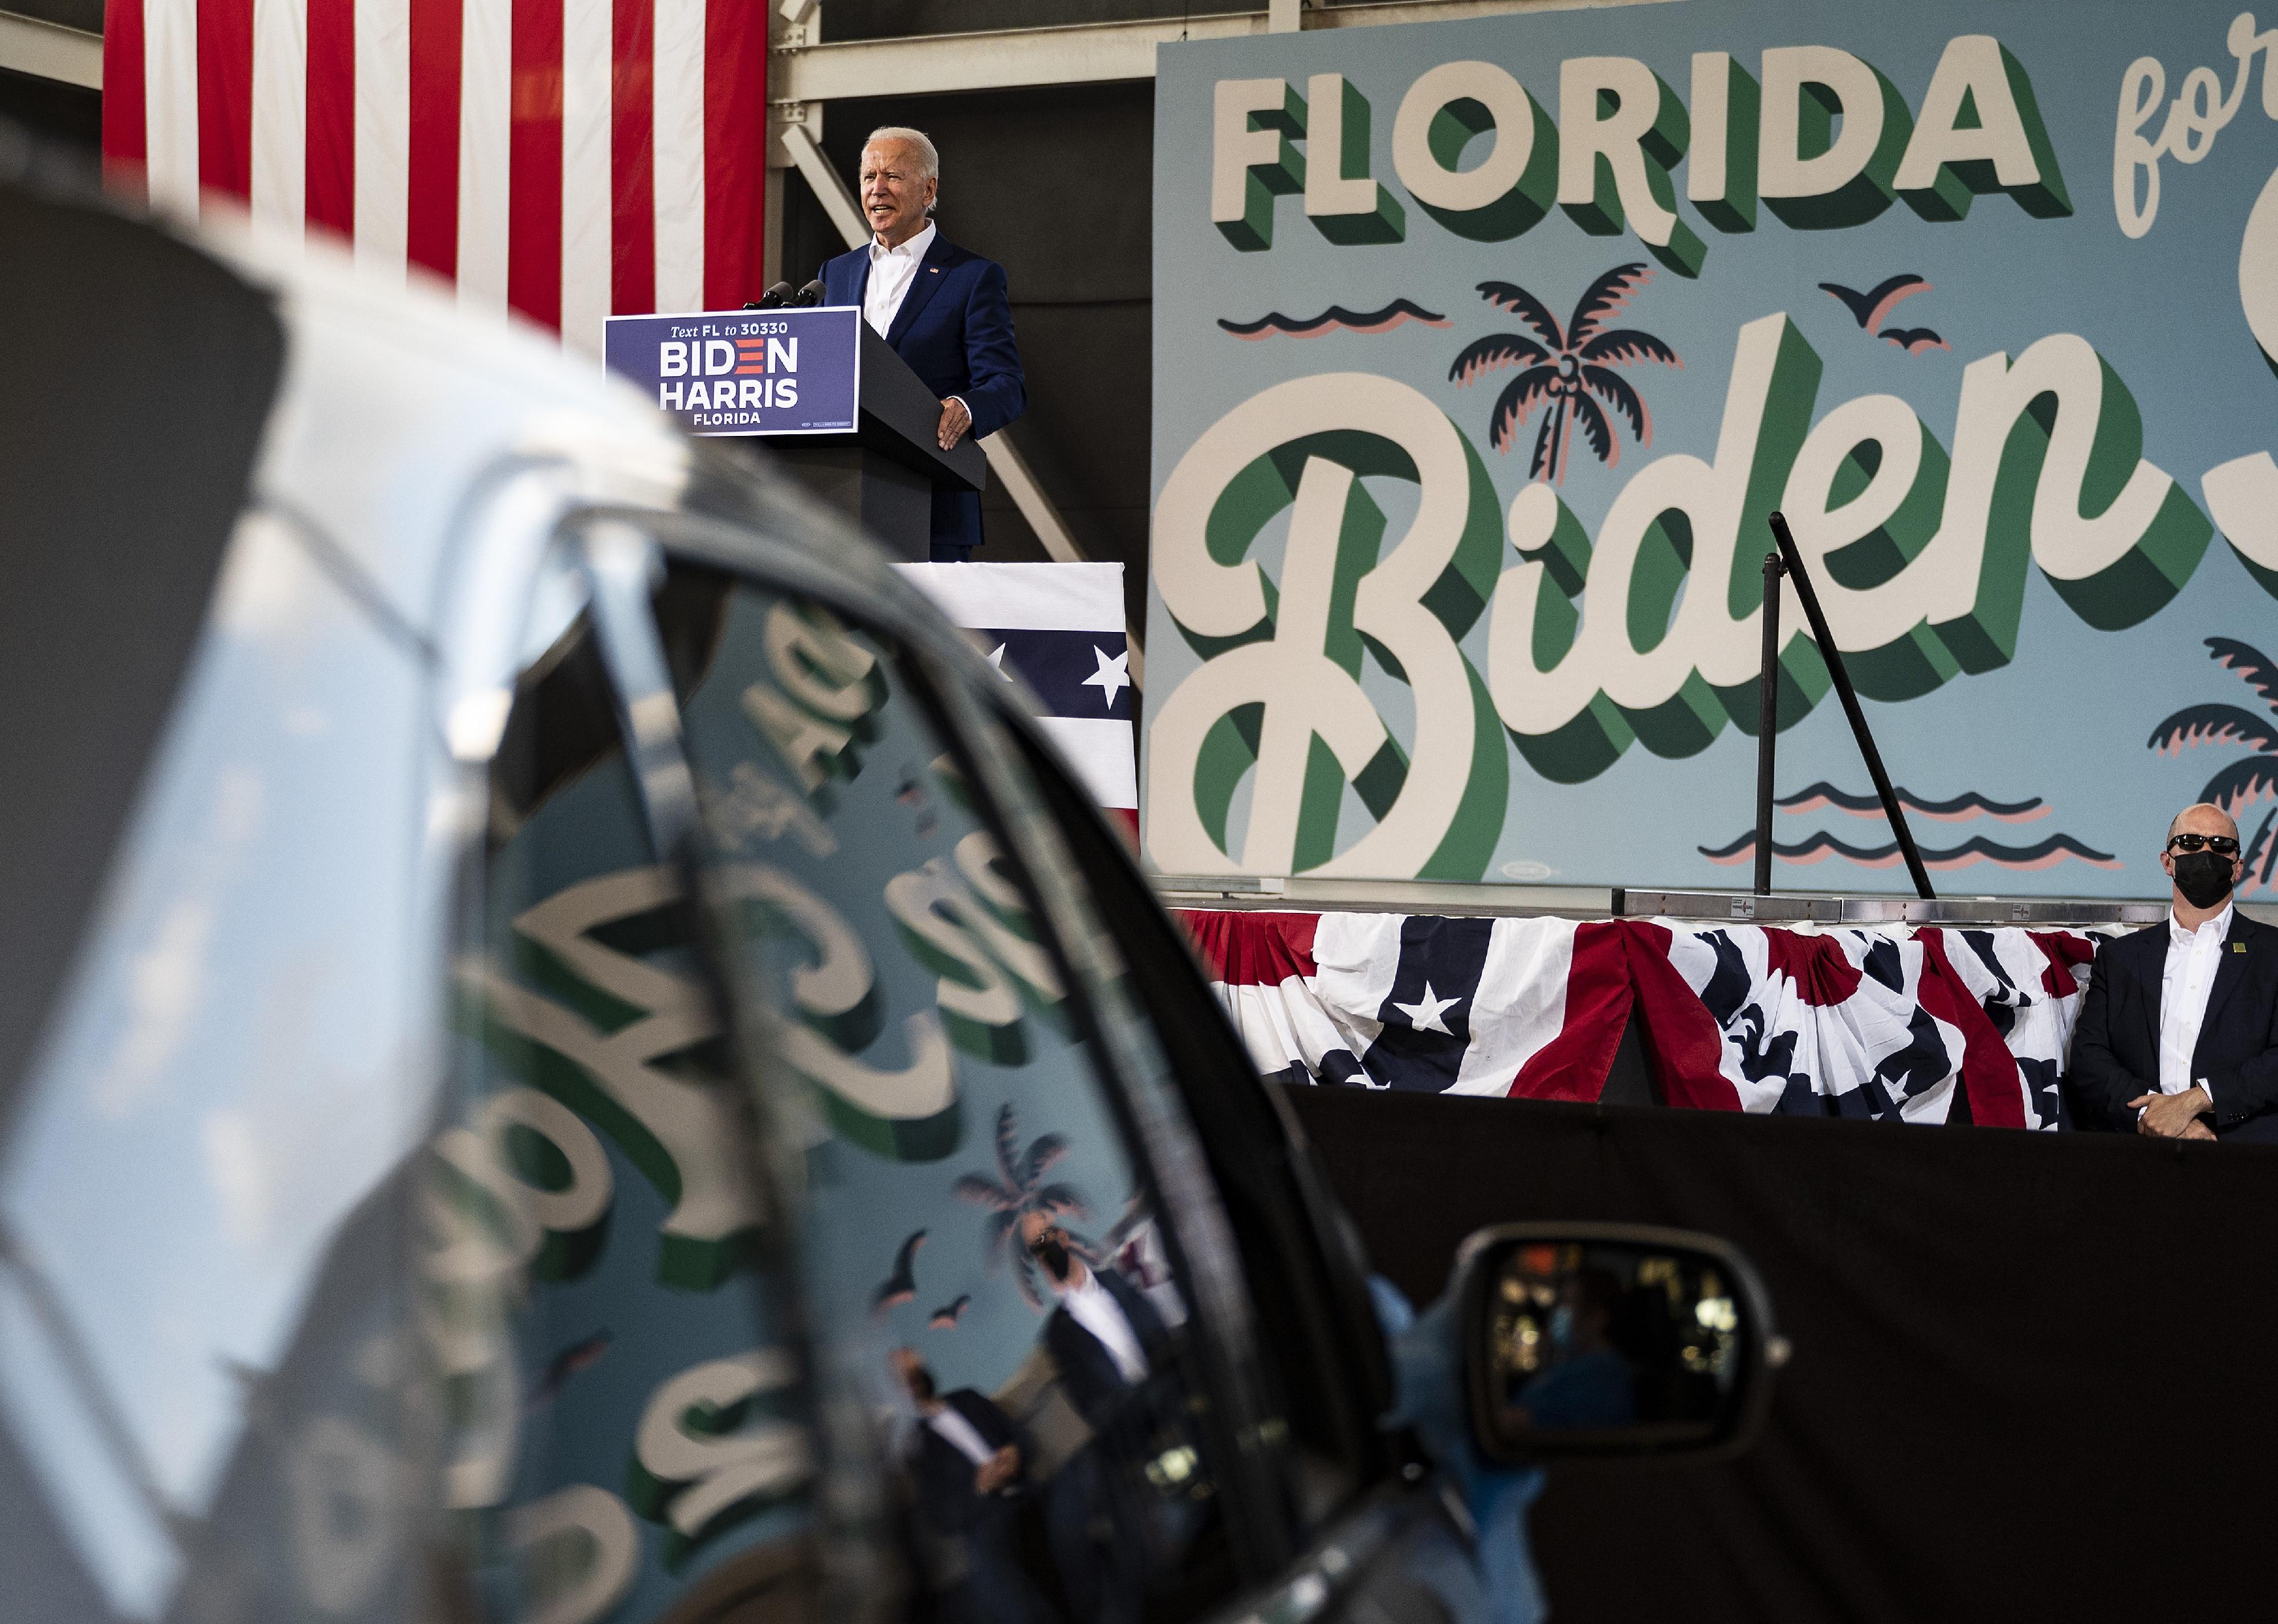 Biden speaking to a crowd in front of a Florida for Biden sign.